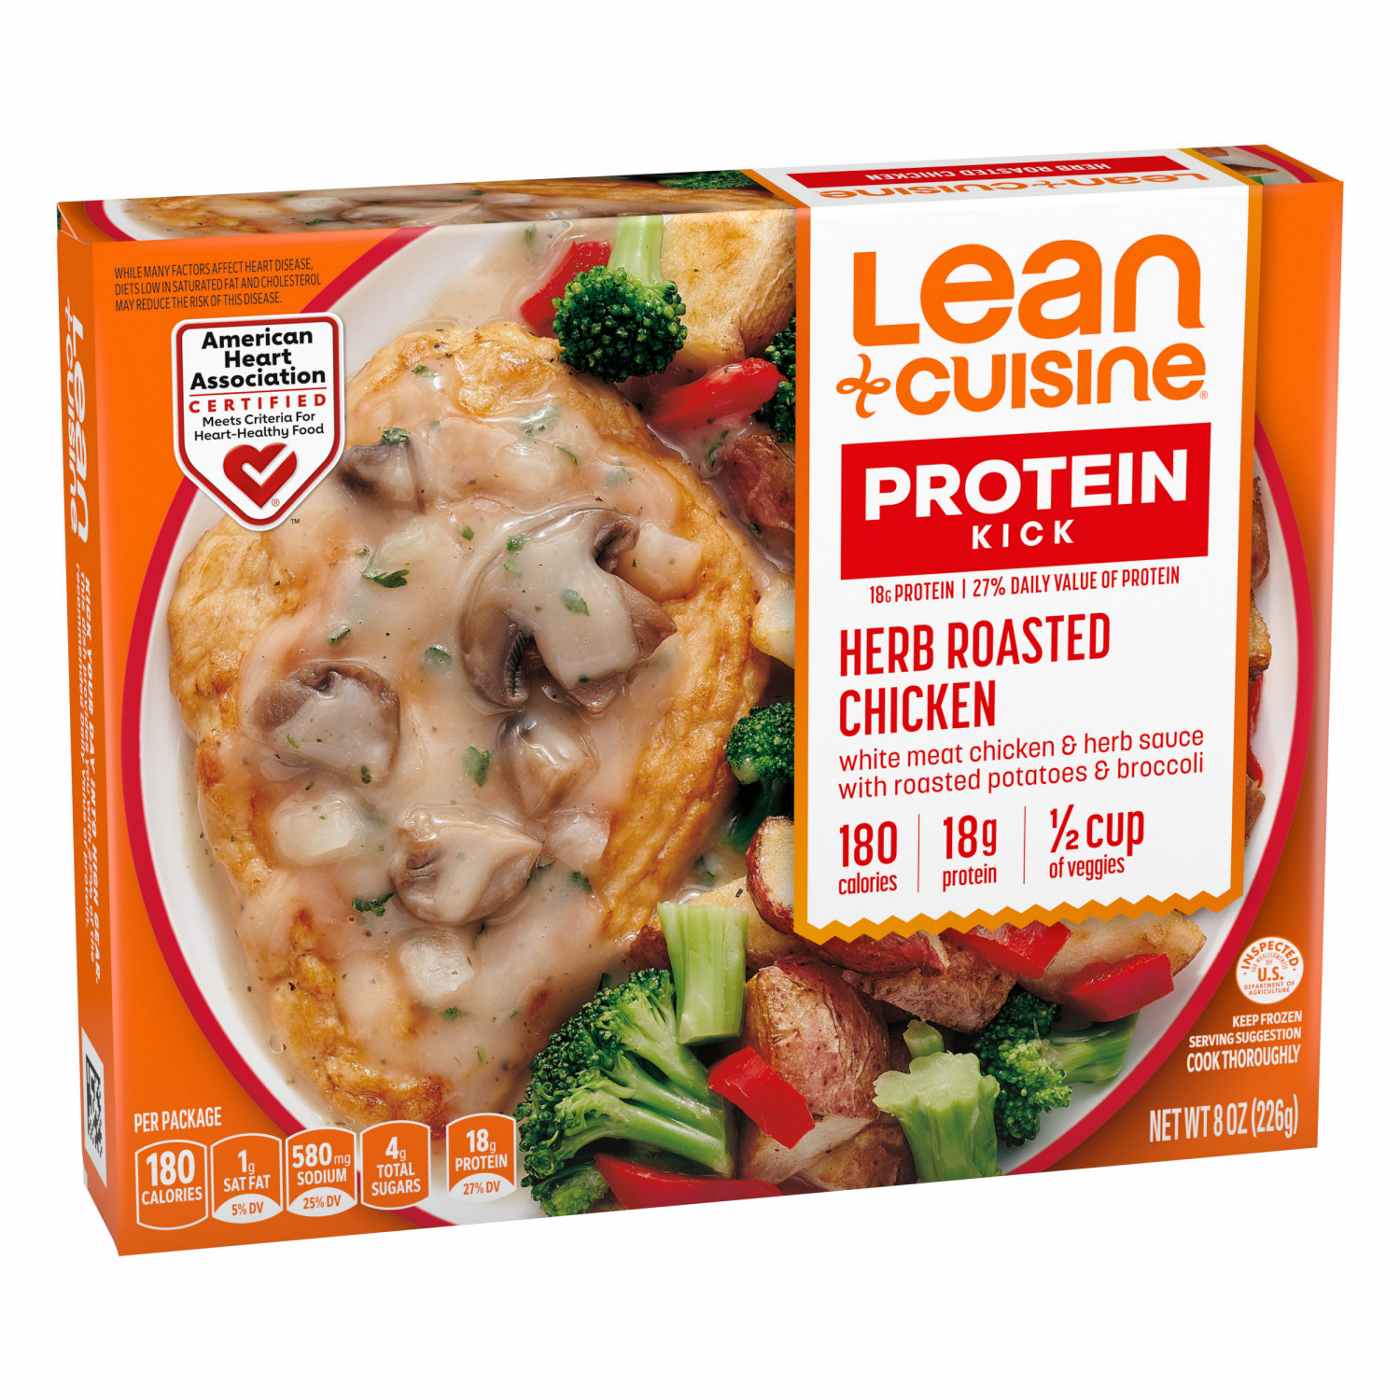 Lean Cuisine 18g Protein Herb Roasted Chicken Frozen Meal; image 7 of 7